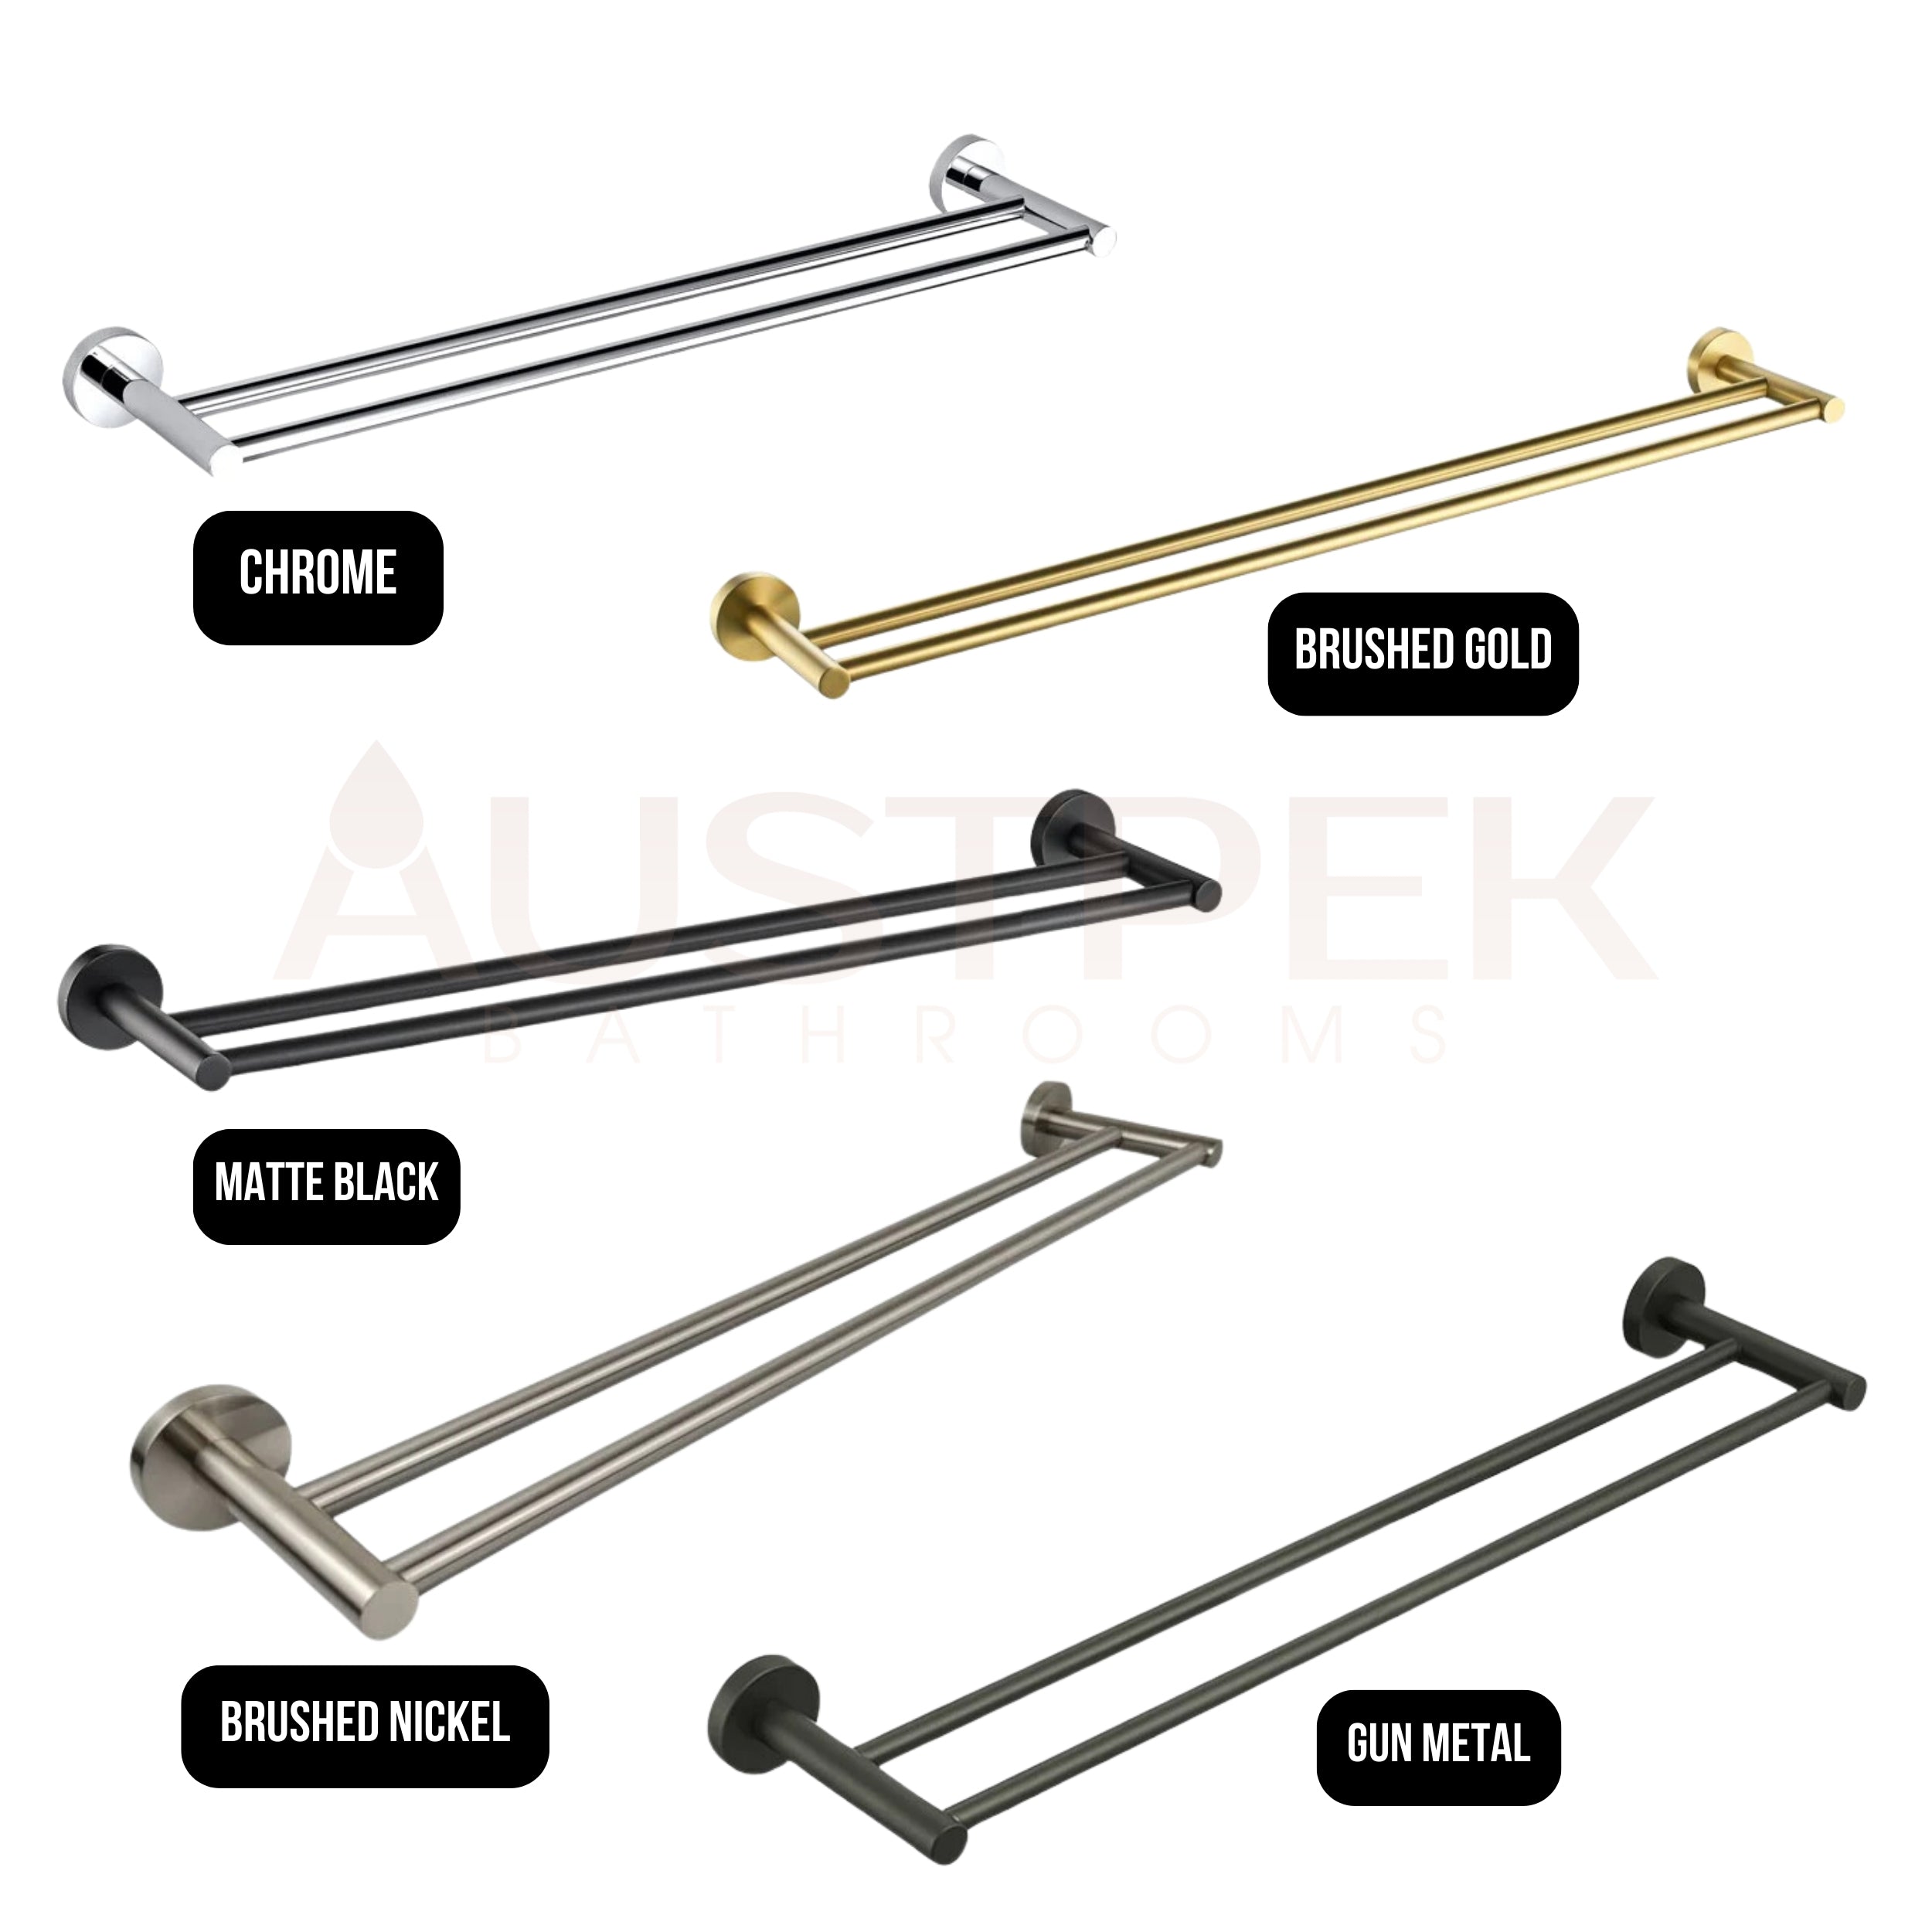 IKON OTUS DOUBLE NON-HEATED TOWEL RAIL BRUSHED GOLD 600MM AND 750MM